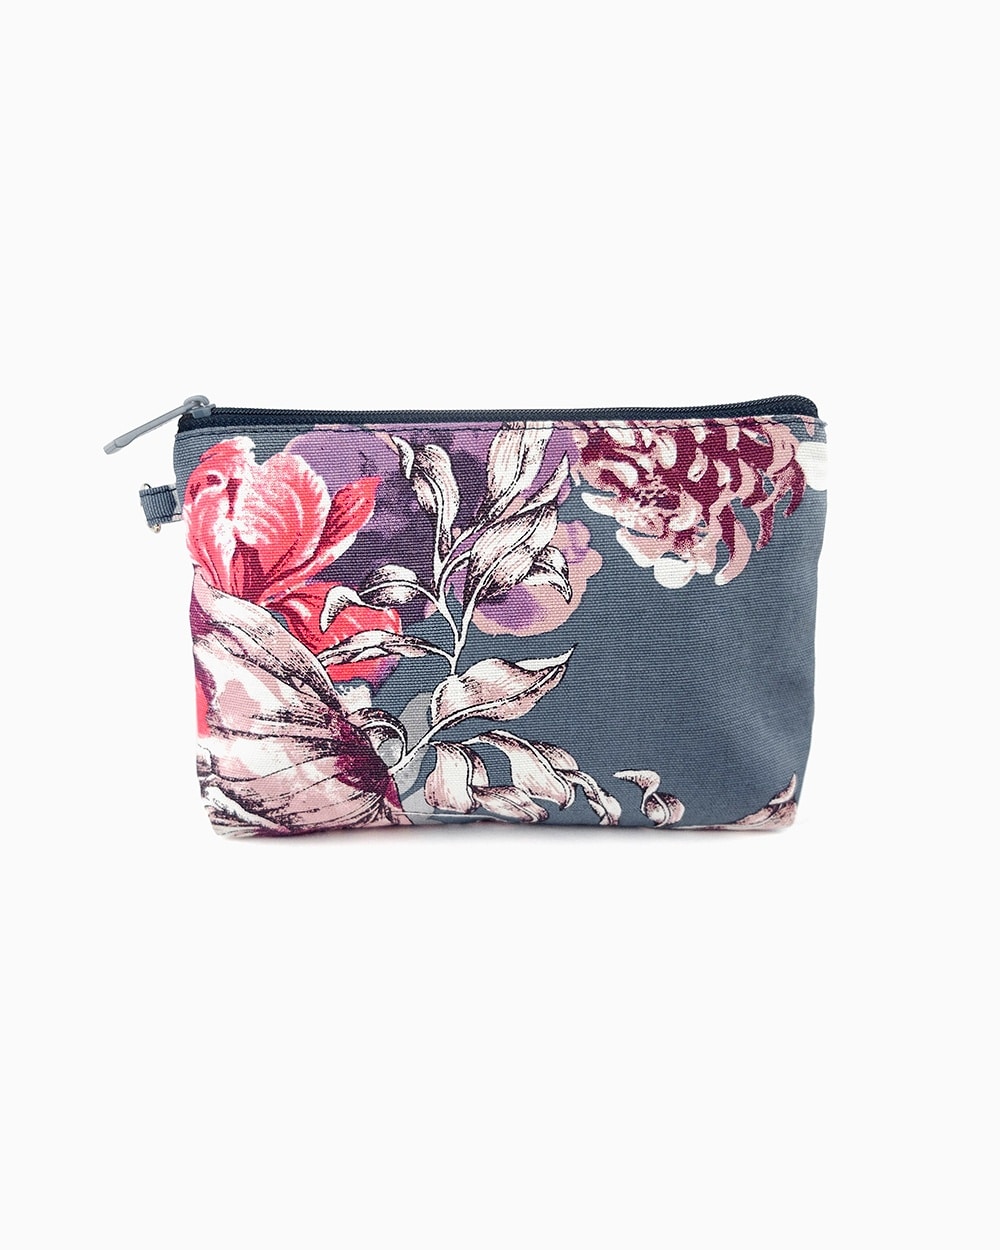 Limited Edition Artist Brush Watercolor Cosmetic Bag